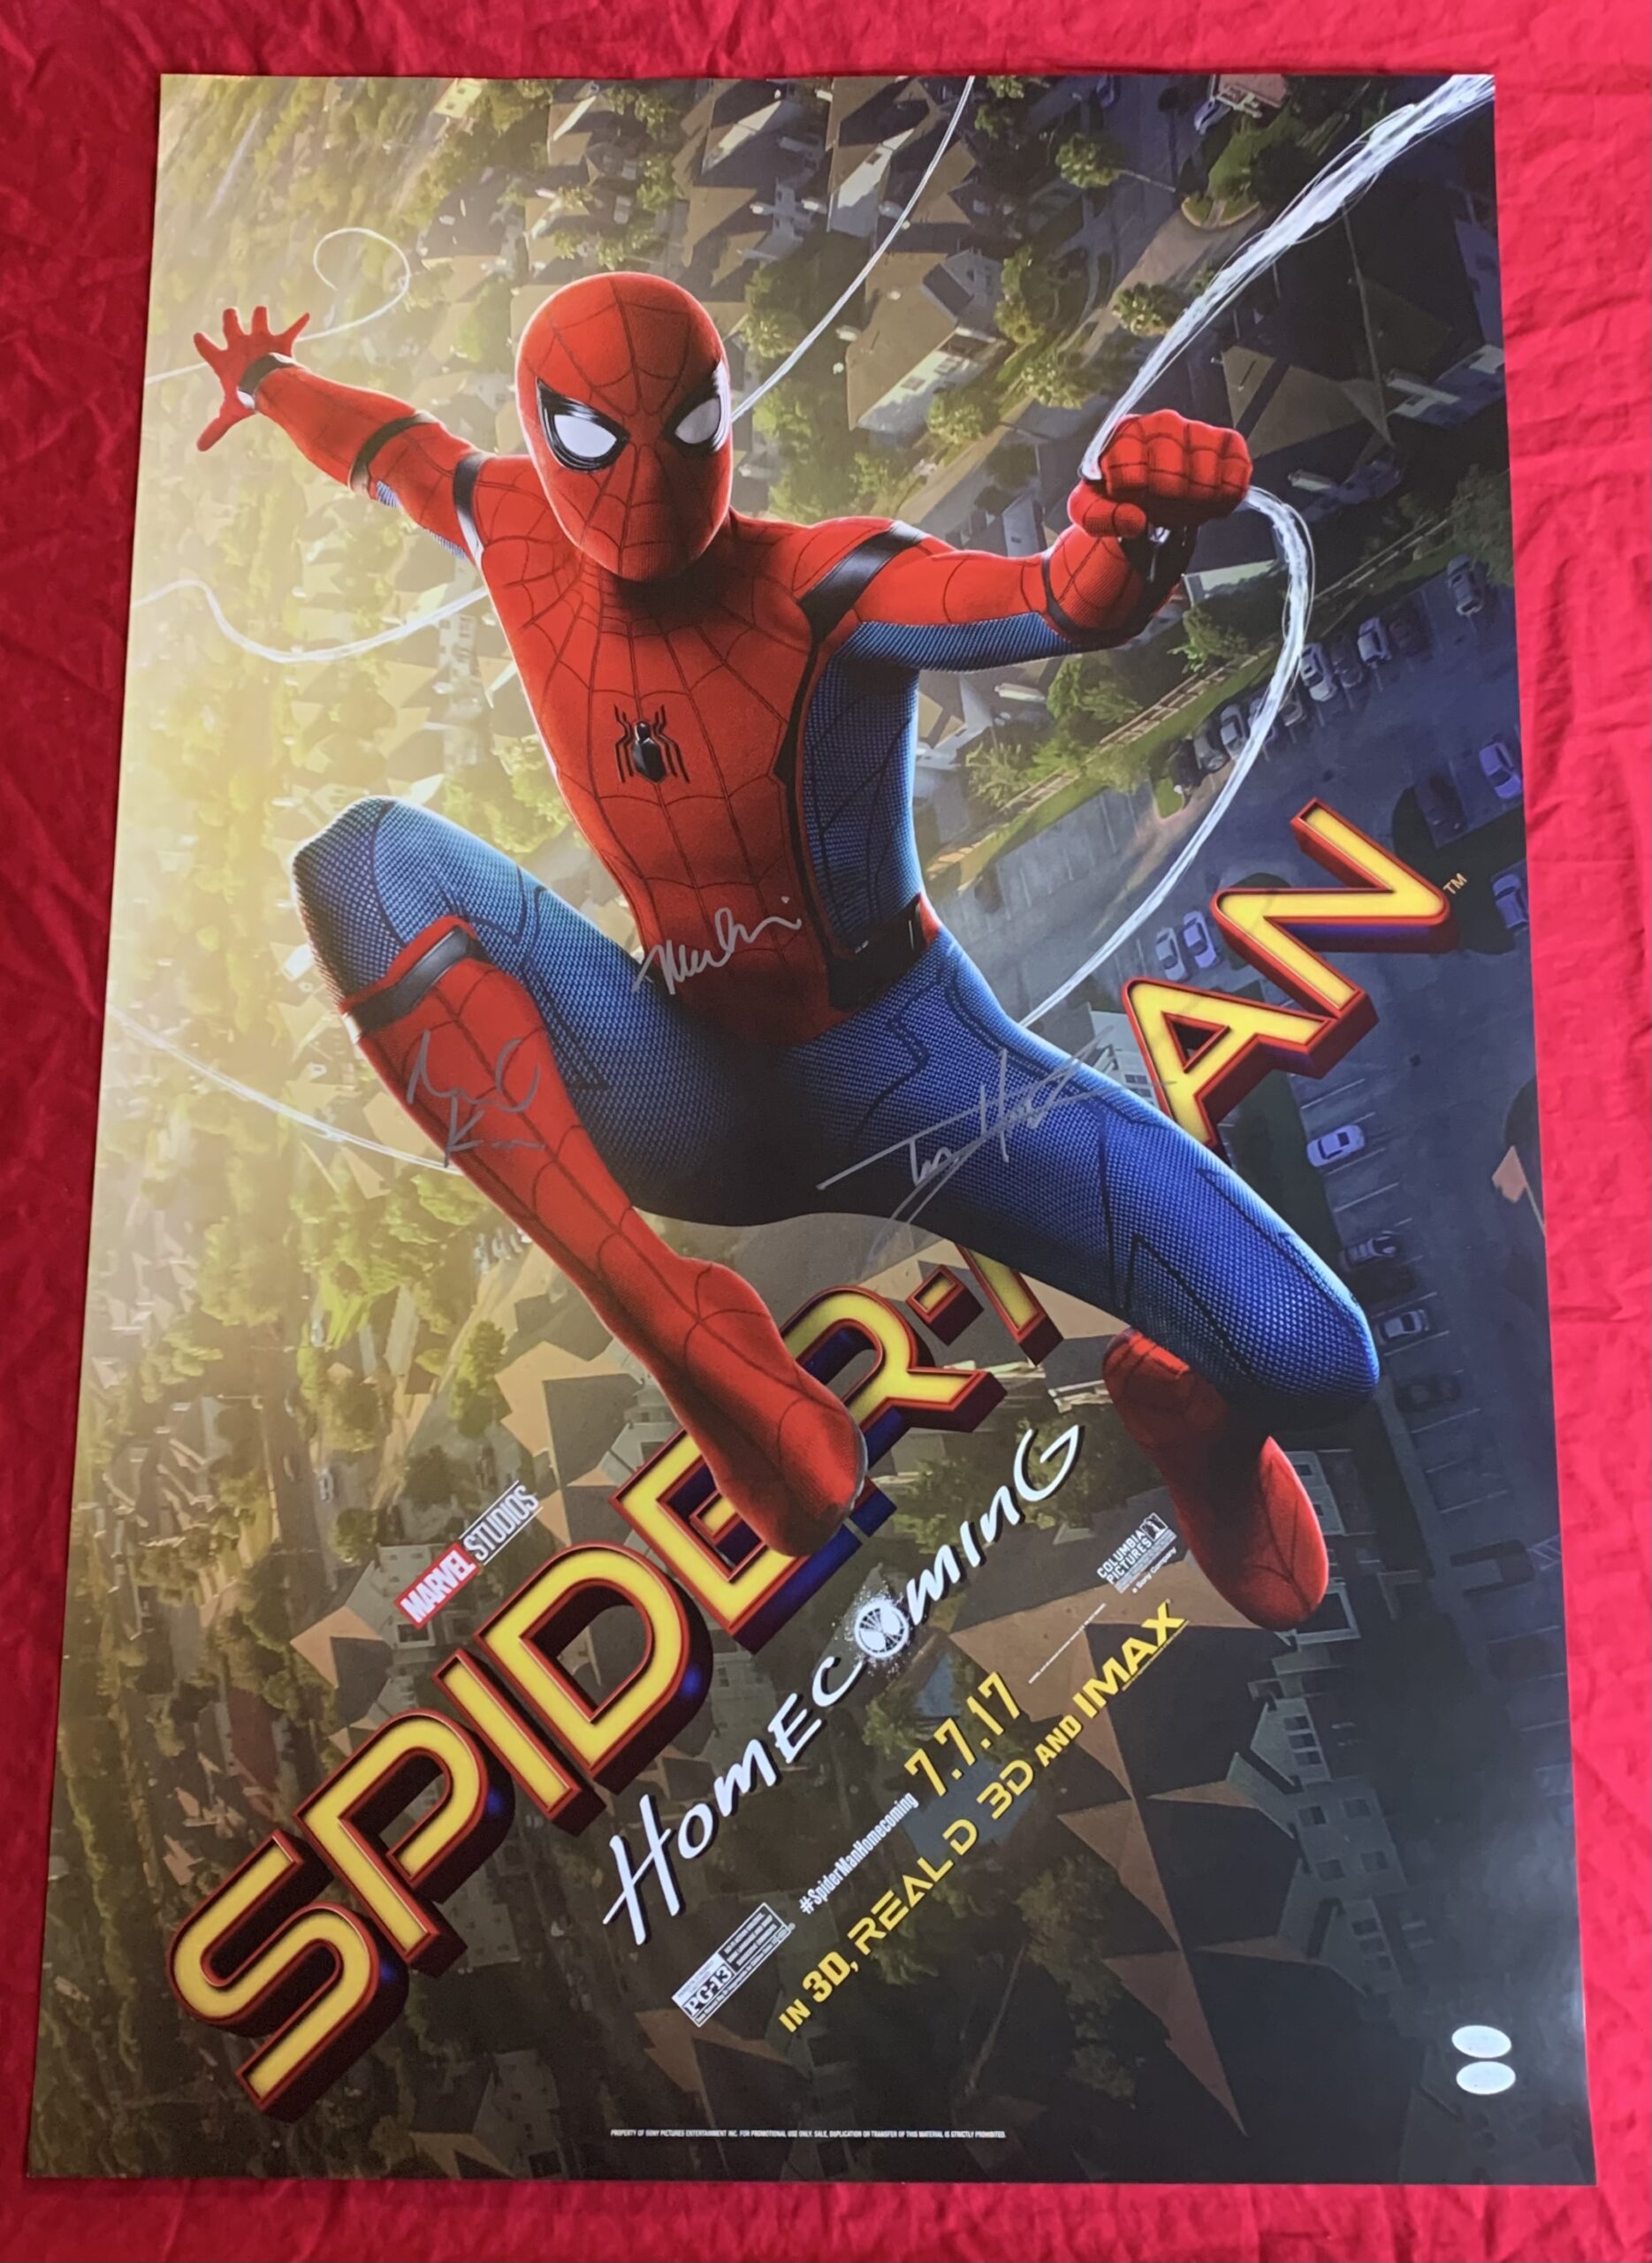 Poster Spiderman Official Movie sla1202 (Wall Poster, 13x19 Inches